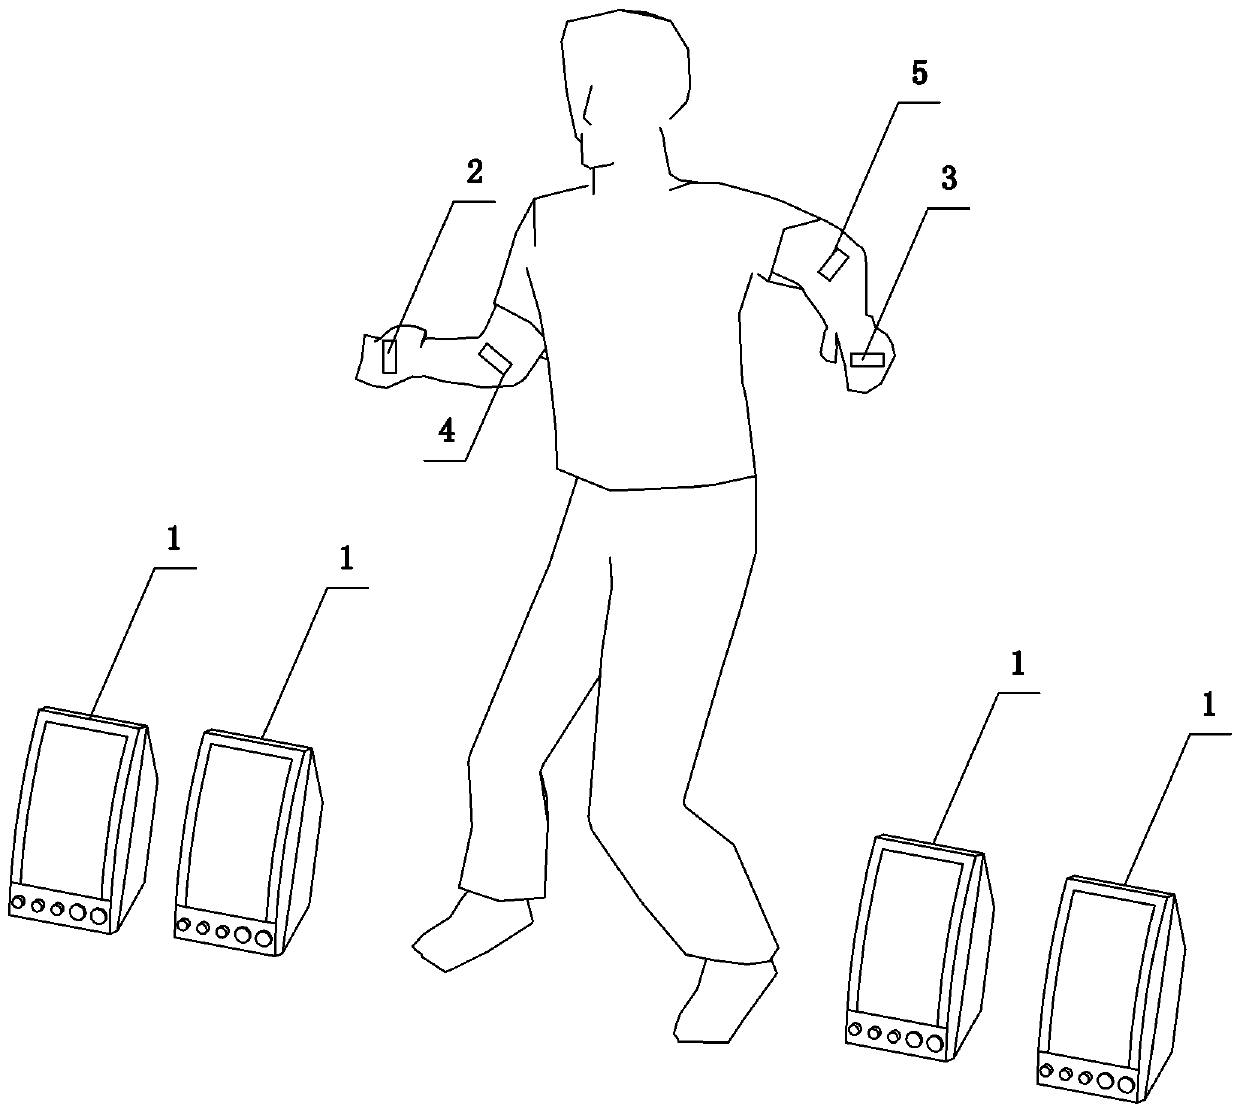 An automatic beat playing device for chest clapping dance